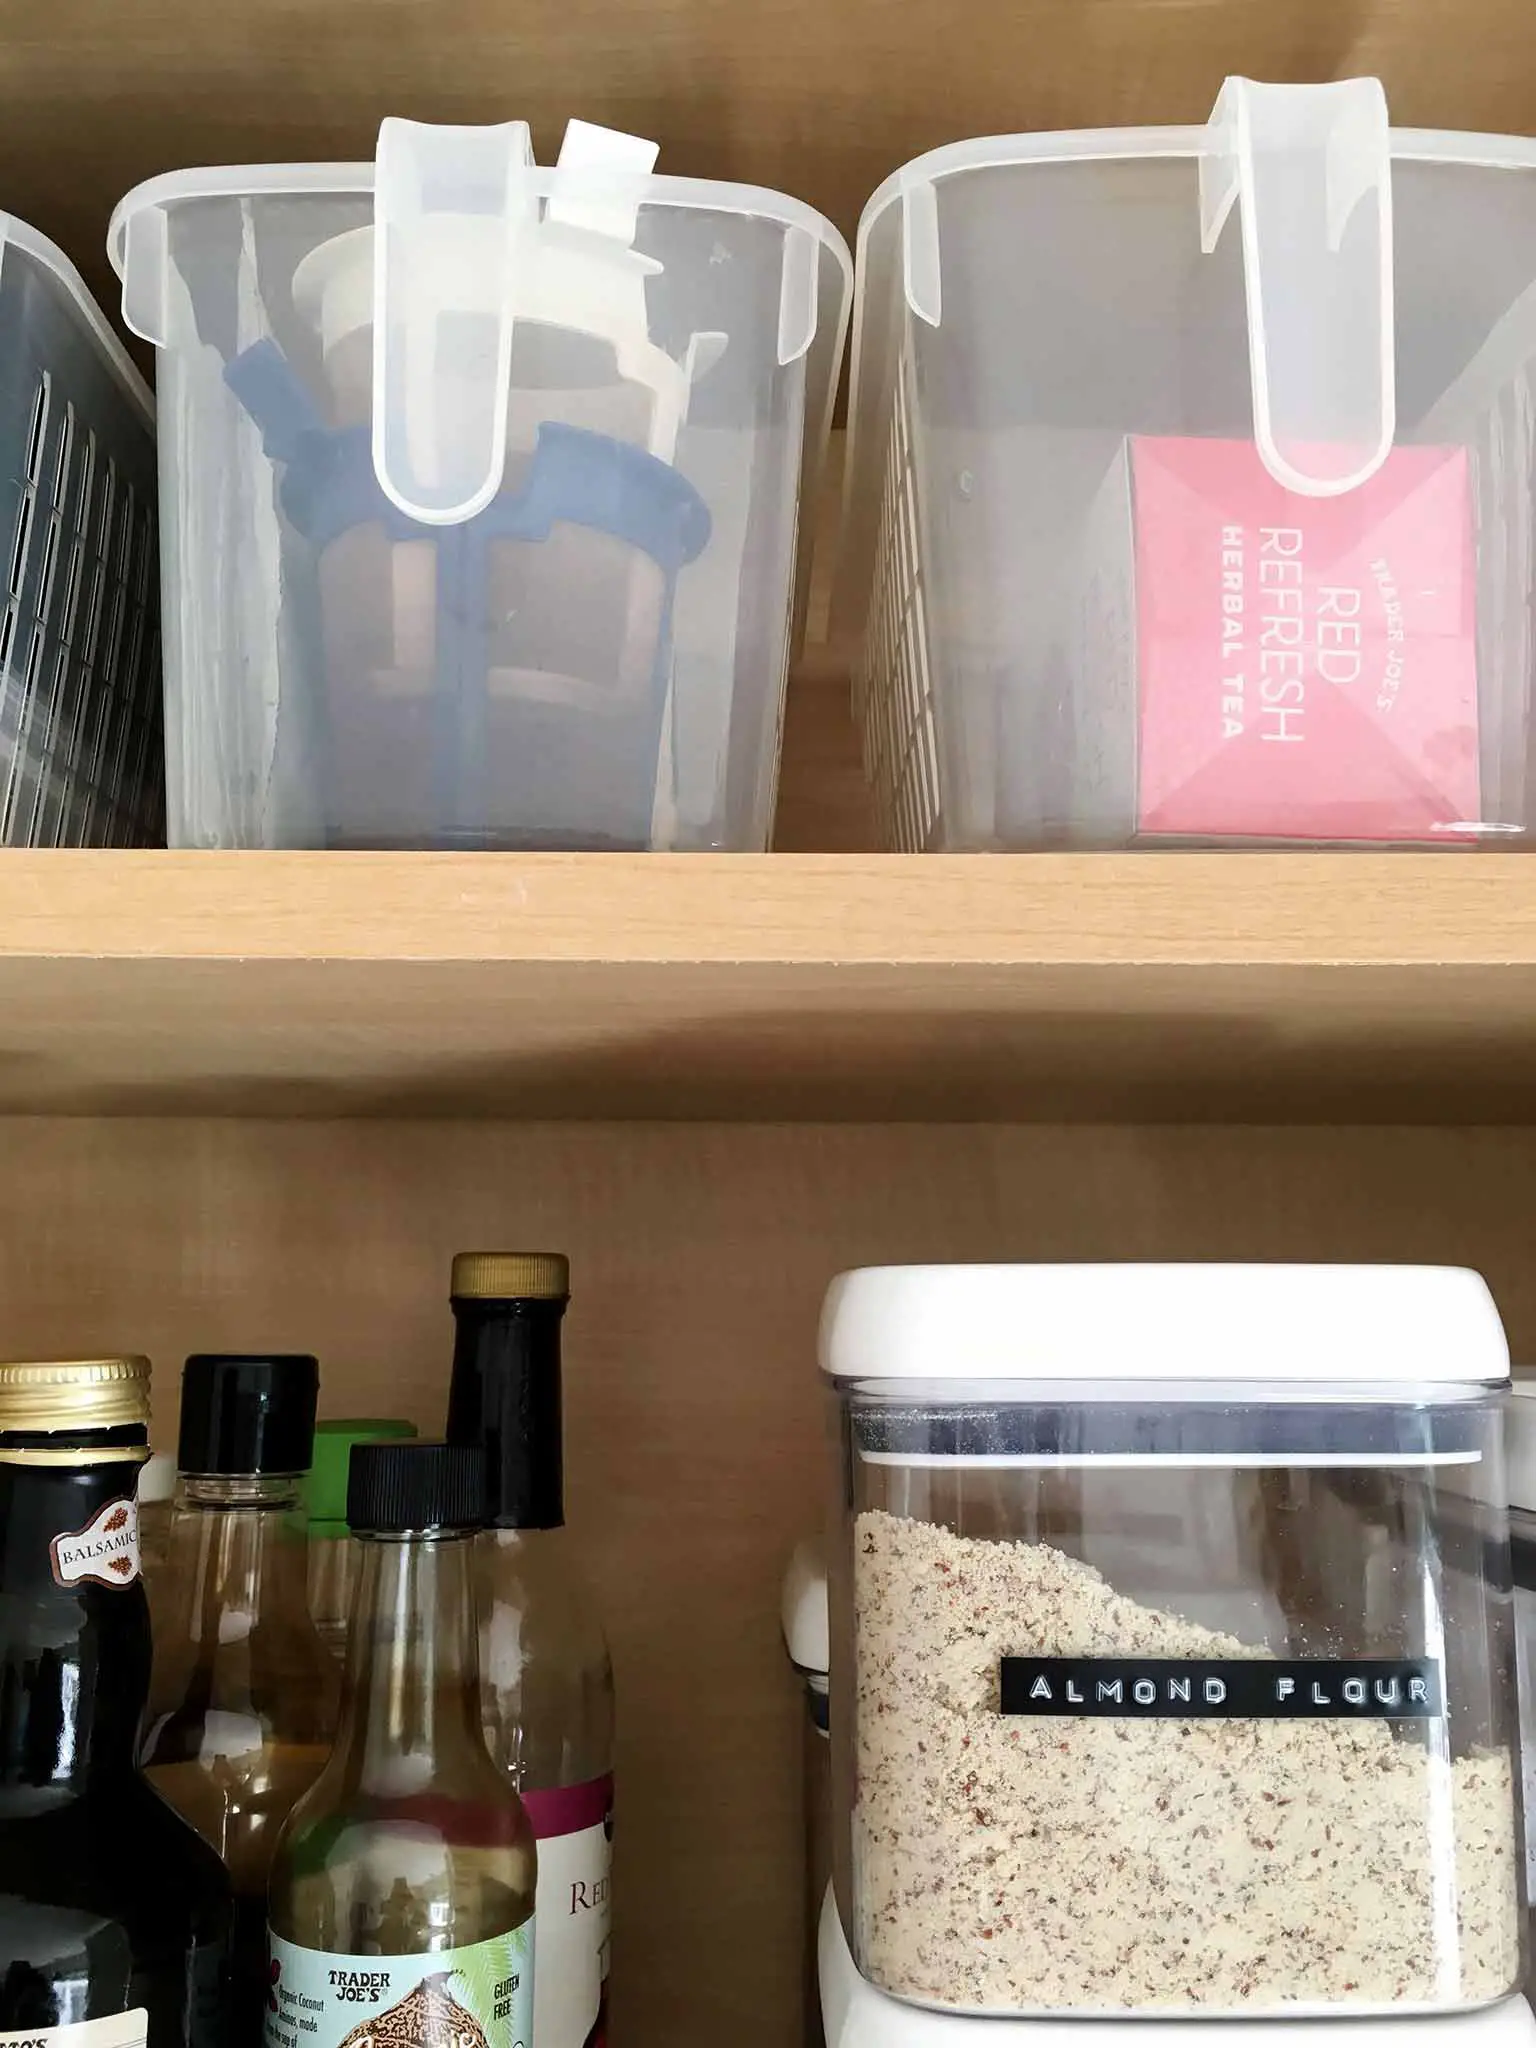 Top shelf storage - clear handled storage baskets | 14 of My Favorite Products to Help You Organize What's Left After Decluttering | That Homebird Life Blog | #organization #organizationideas